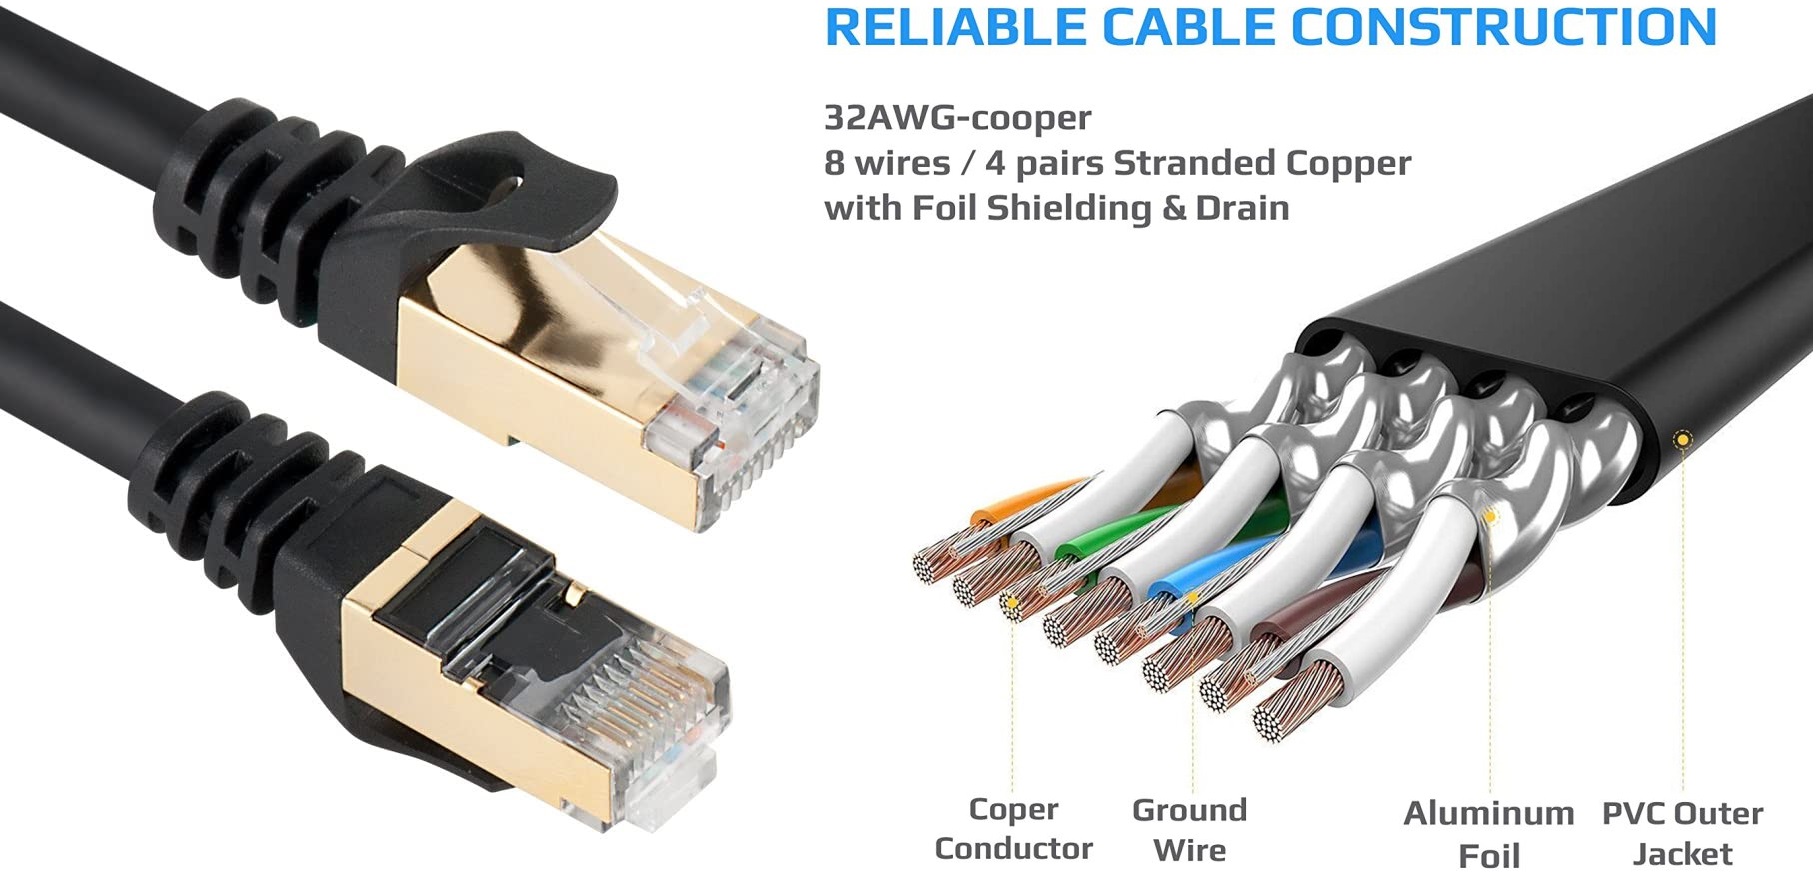 RJ45 CAT7 ETHERNET NETWORK 20M 10 GBPS SSTP PATCH LEAD FLAT CABLE LEAD GOLD UK 